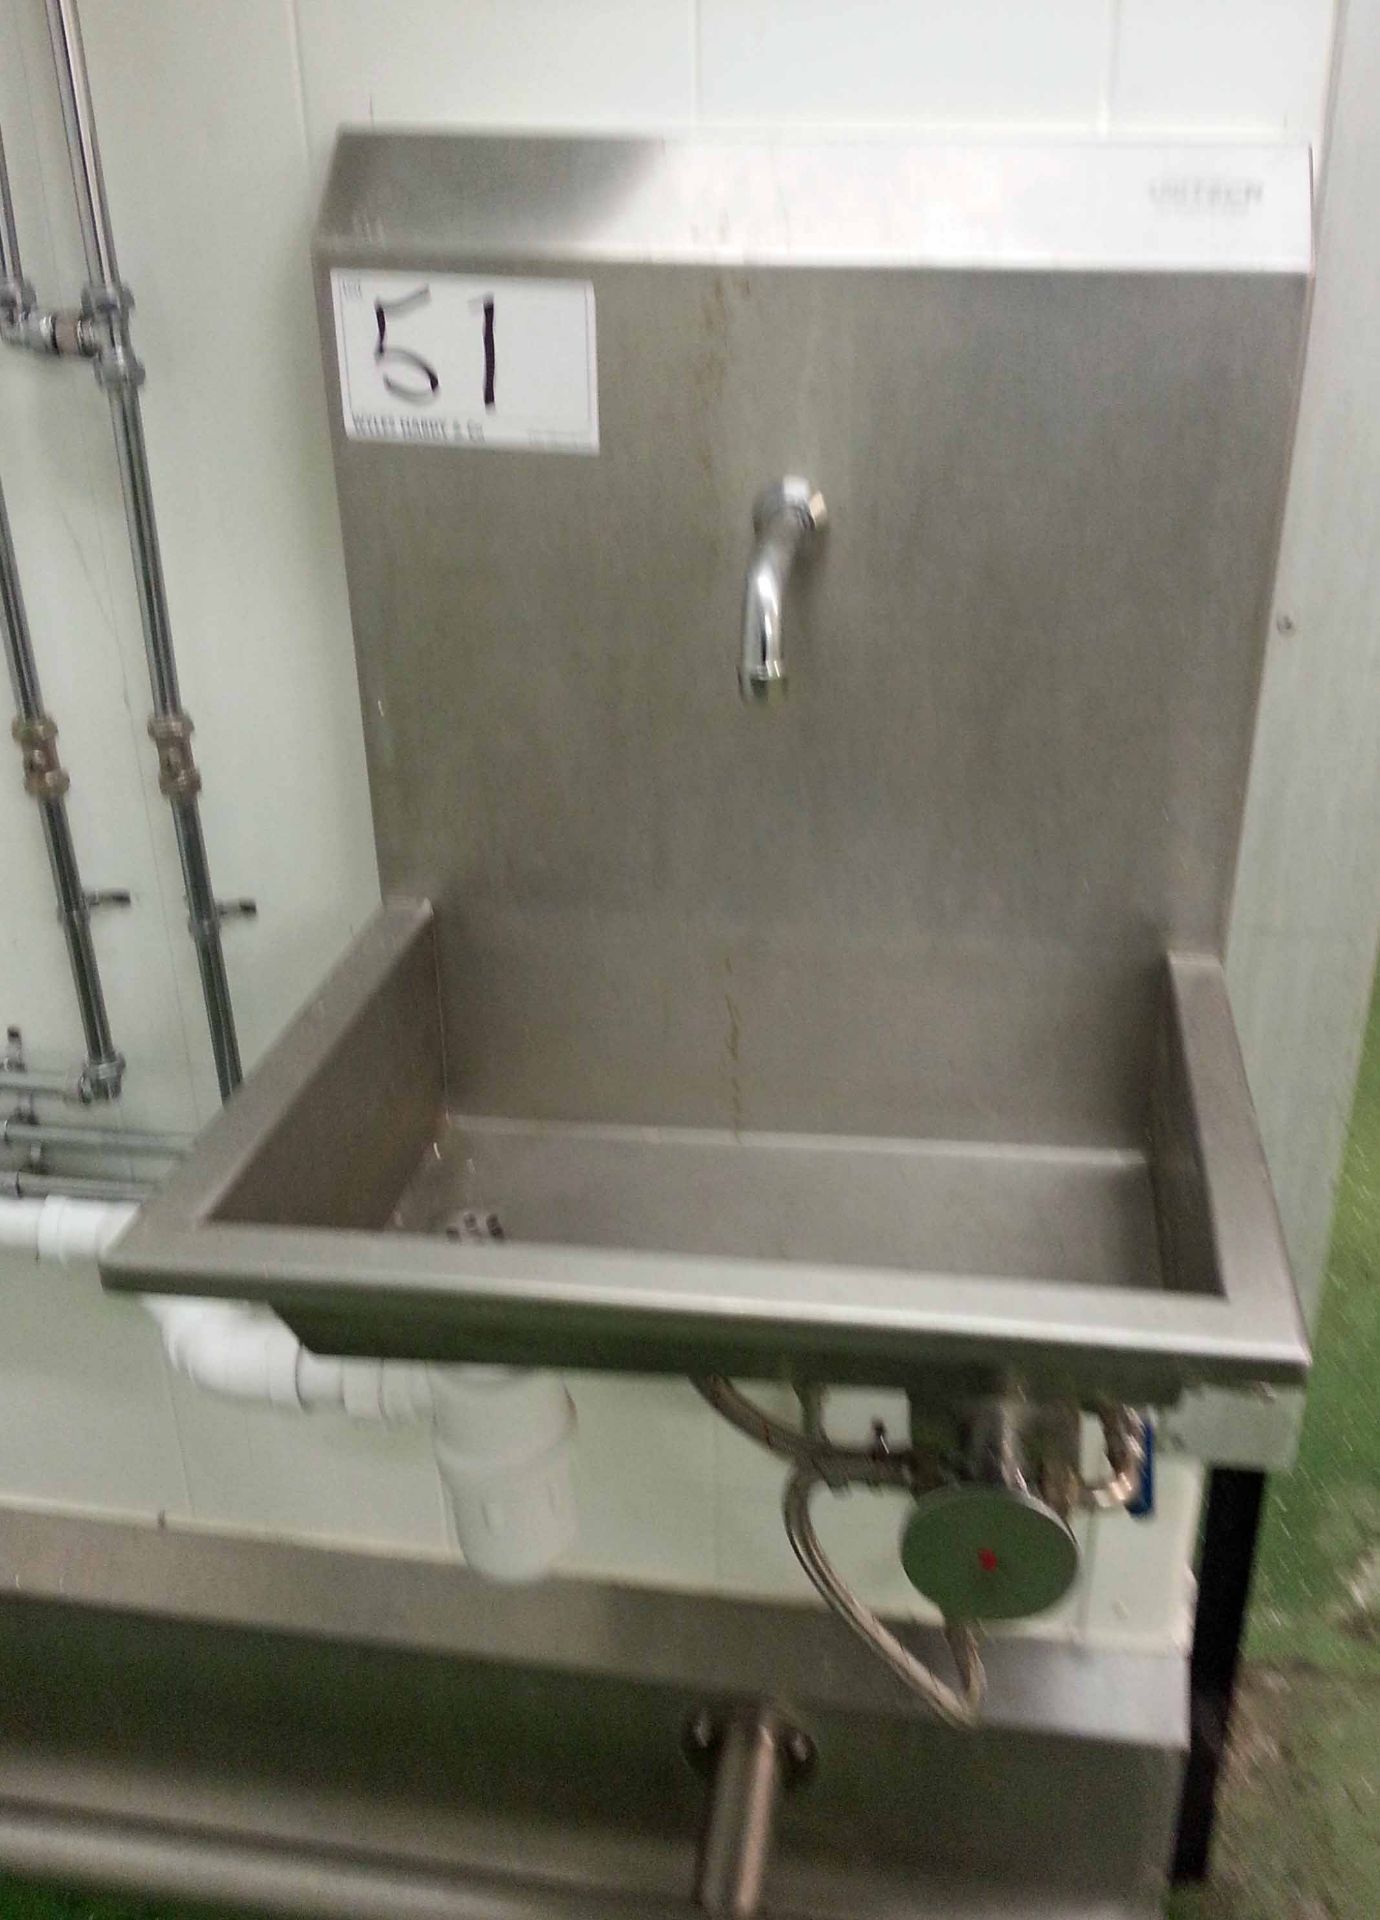 A UNITECH Stainless Steel Single Station Knee Operated Sink. (A Method Statement is Required Prior